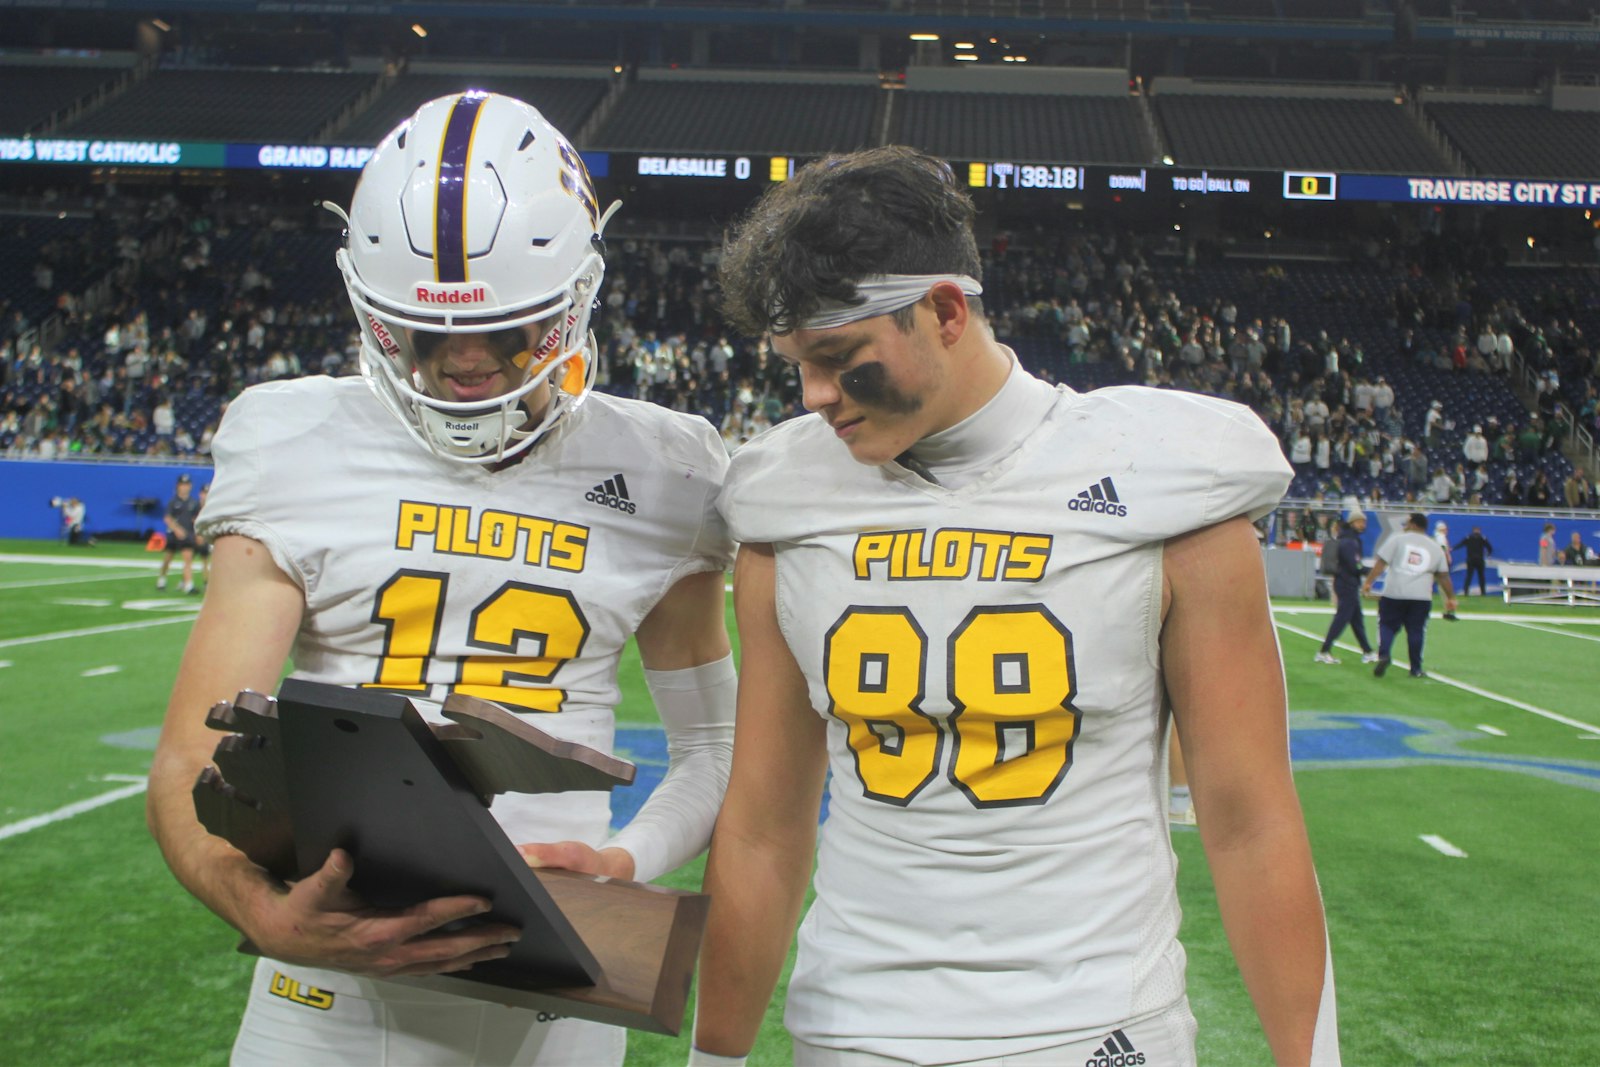 Captains Brady Drogosh and Mason Muragin admire the trophy the Warren DeLaSalle Pilots received for winning the Division 2 state football championship.